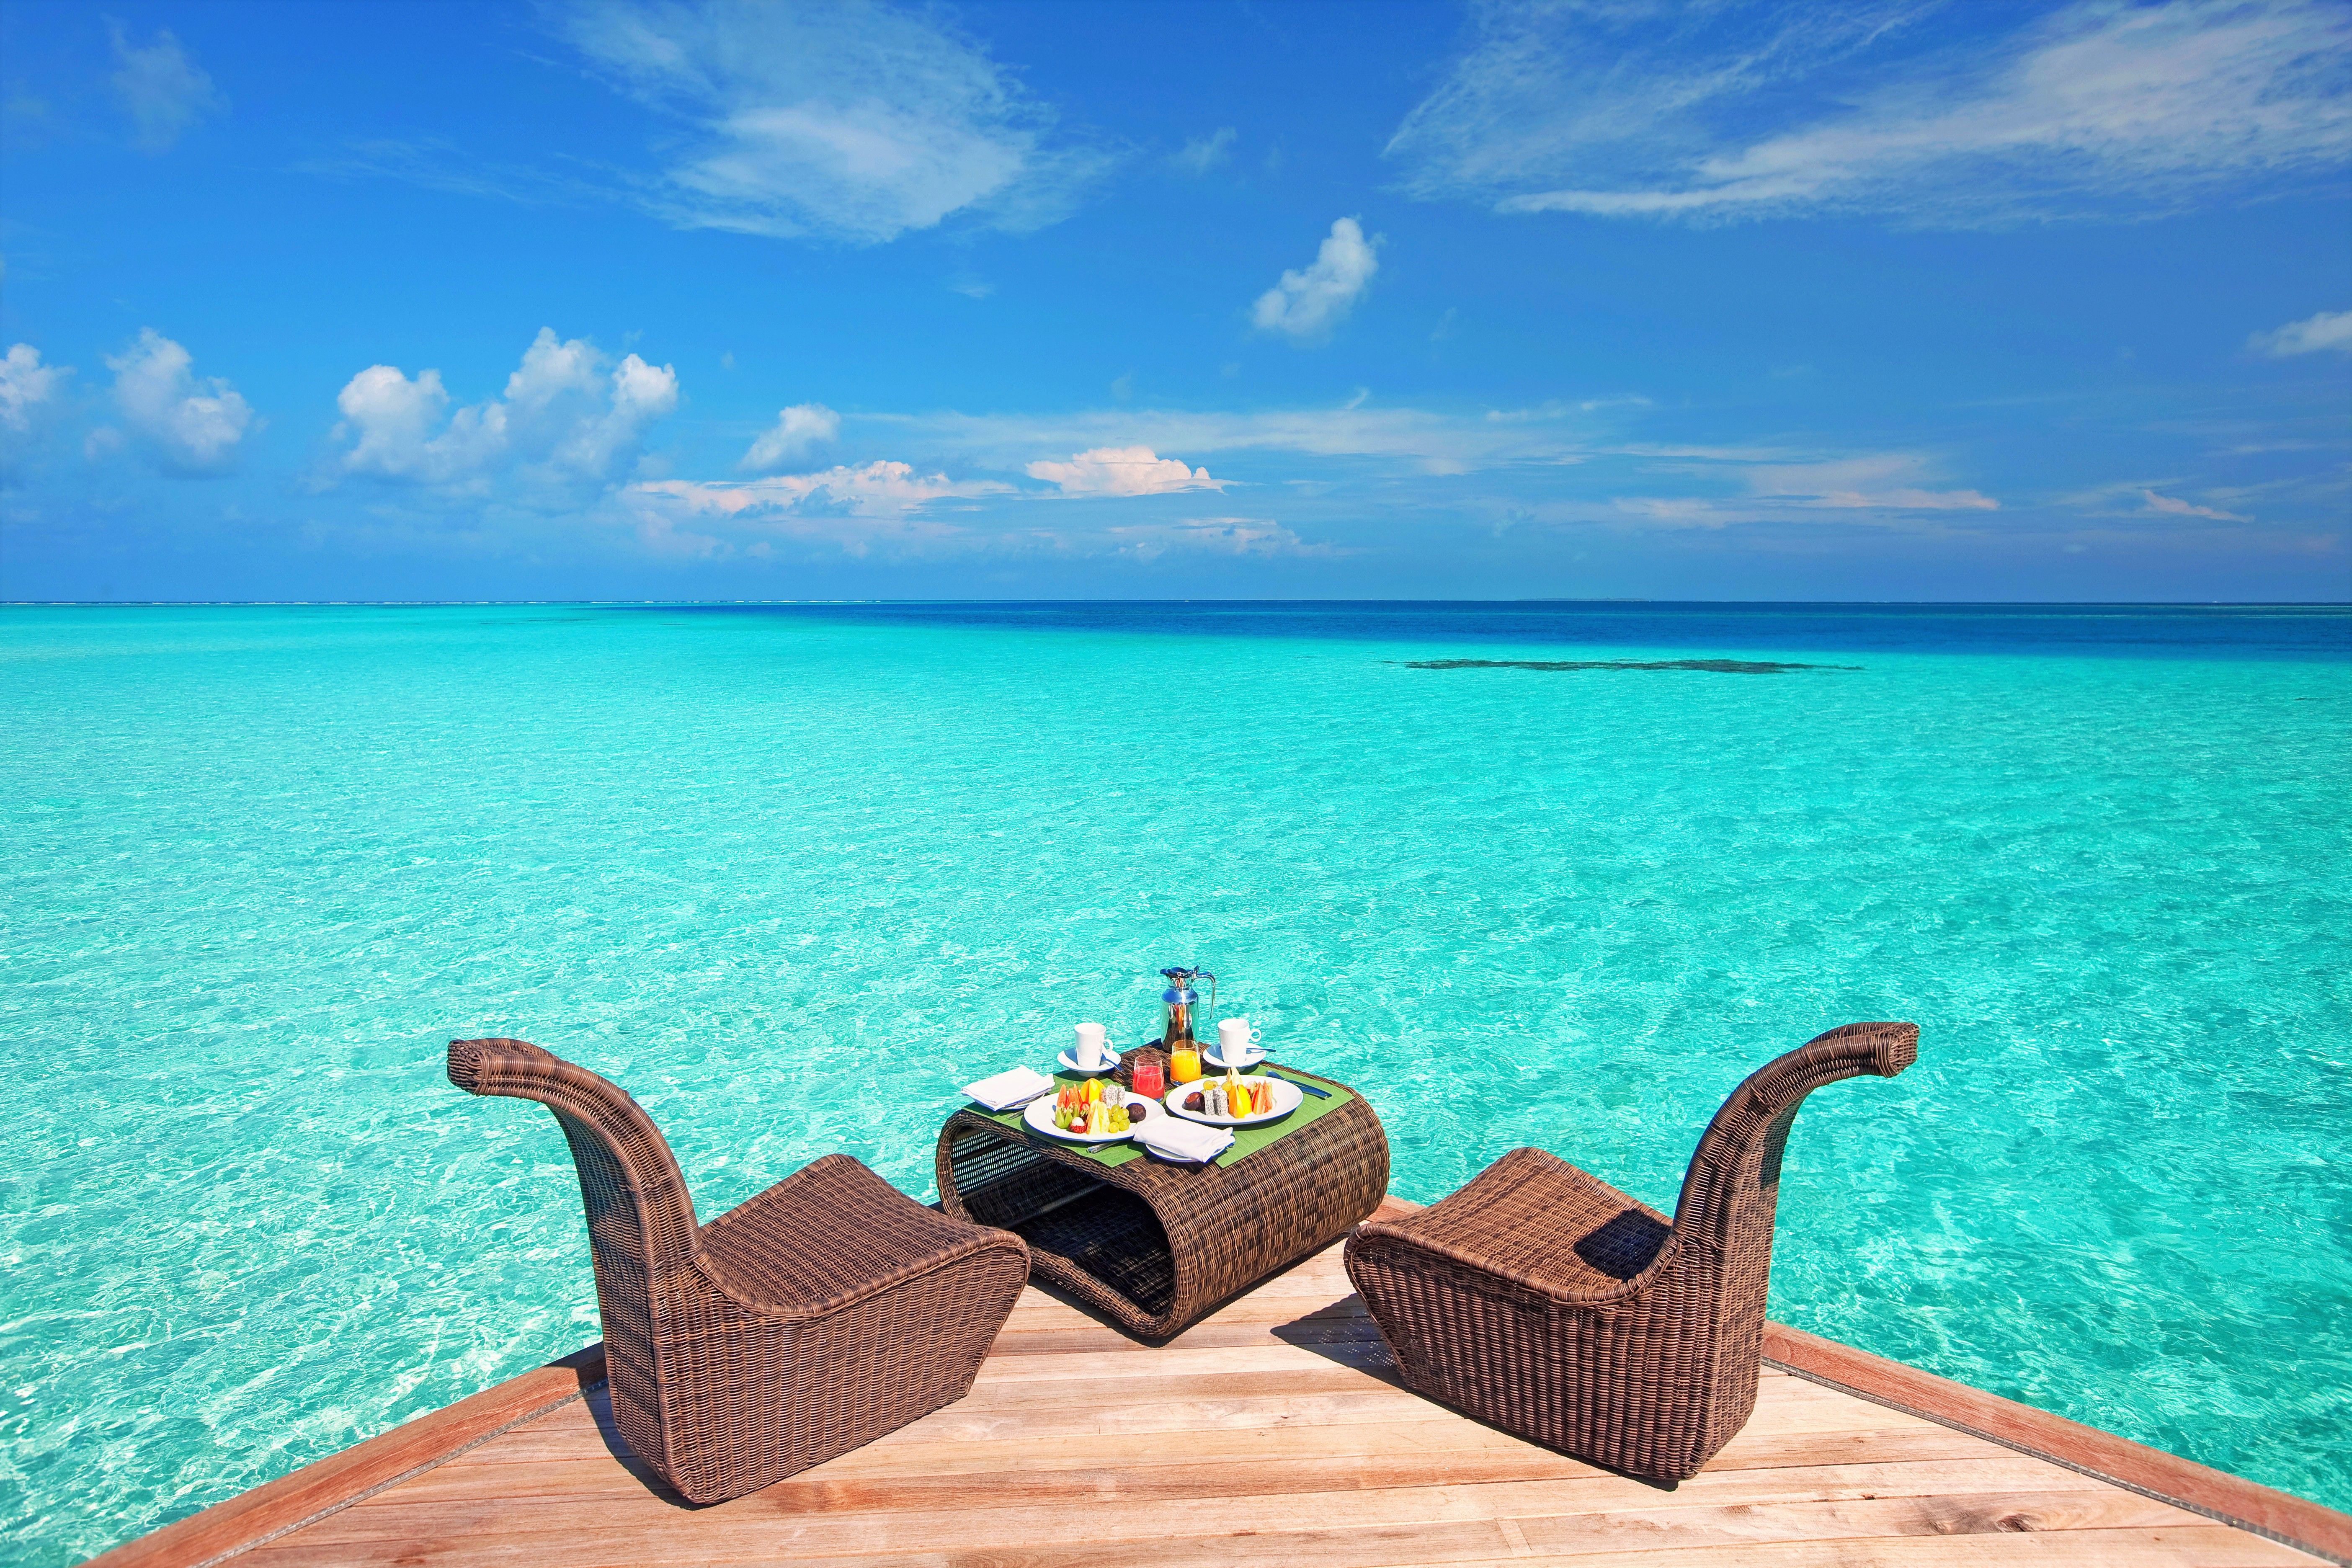 Lunch with View of Tropical Sea 4k Ultra HD Wallpaper